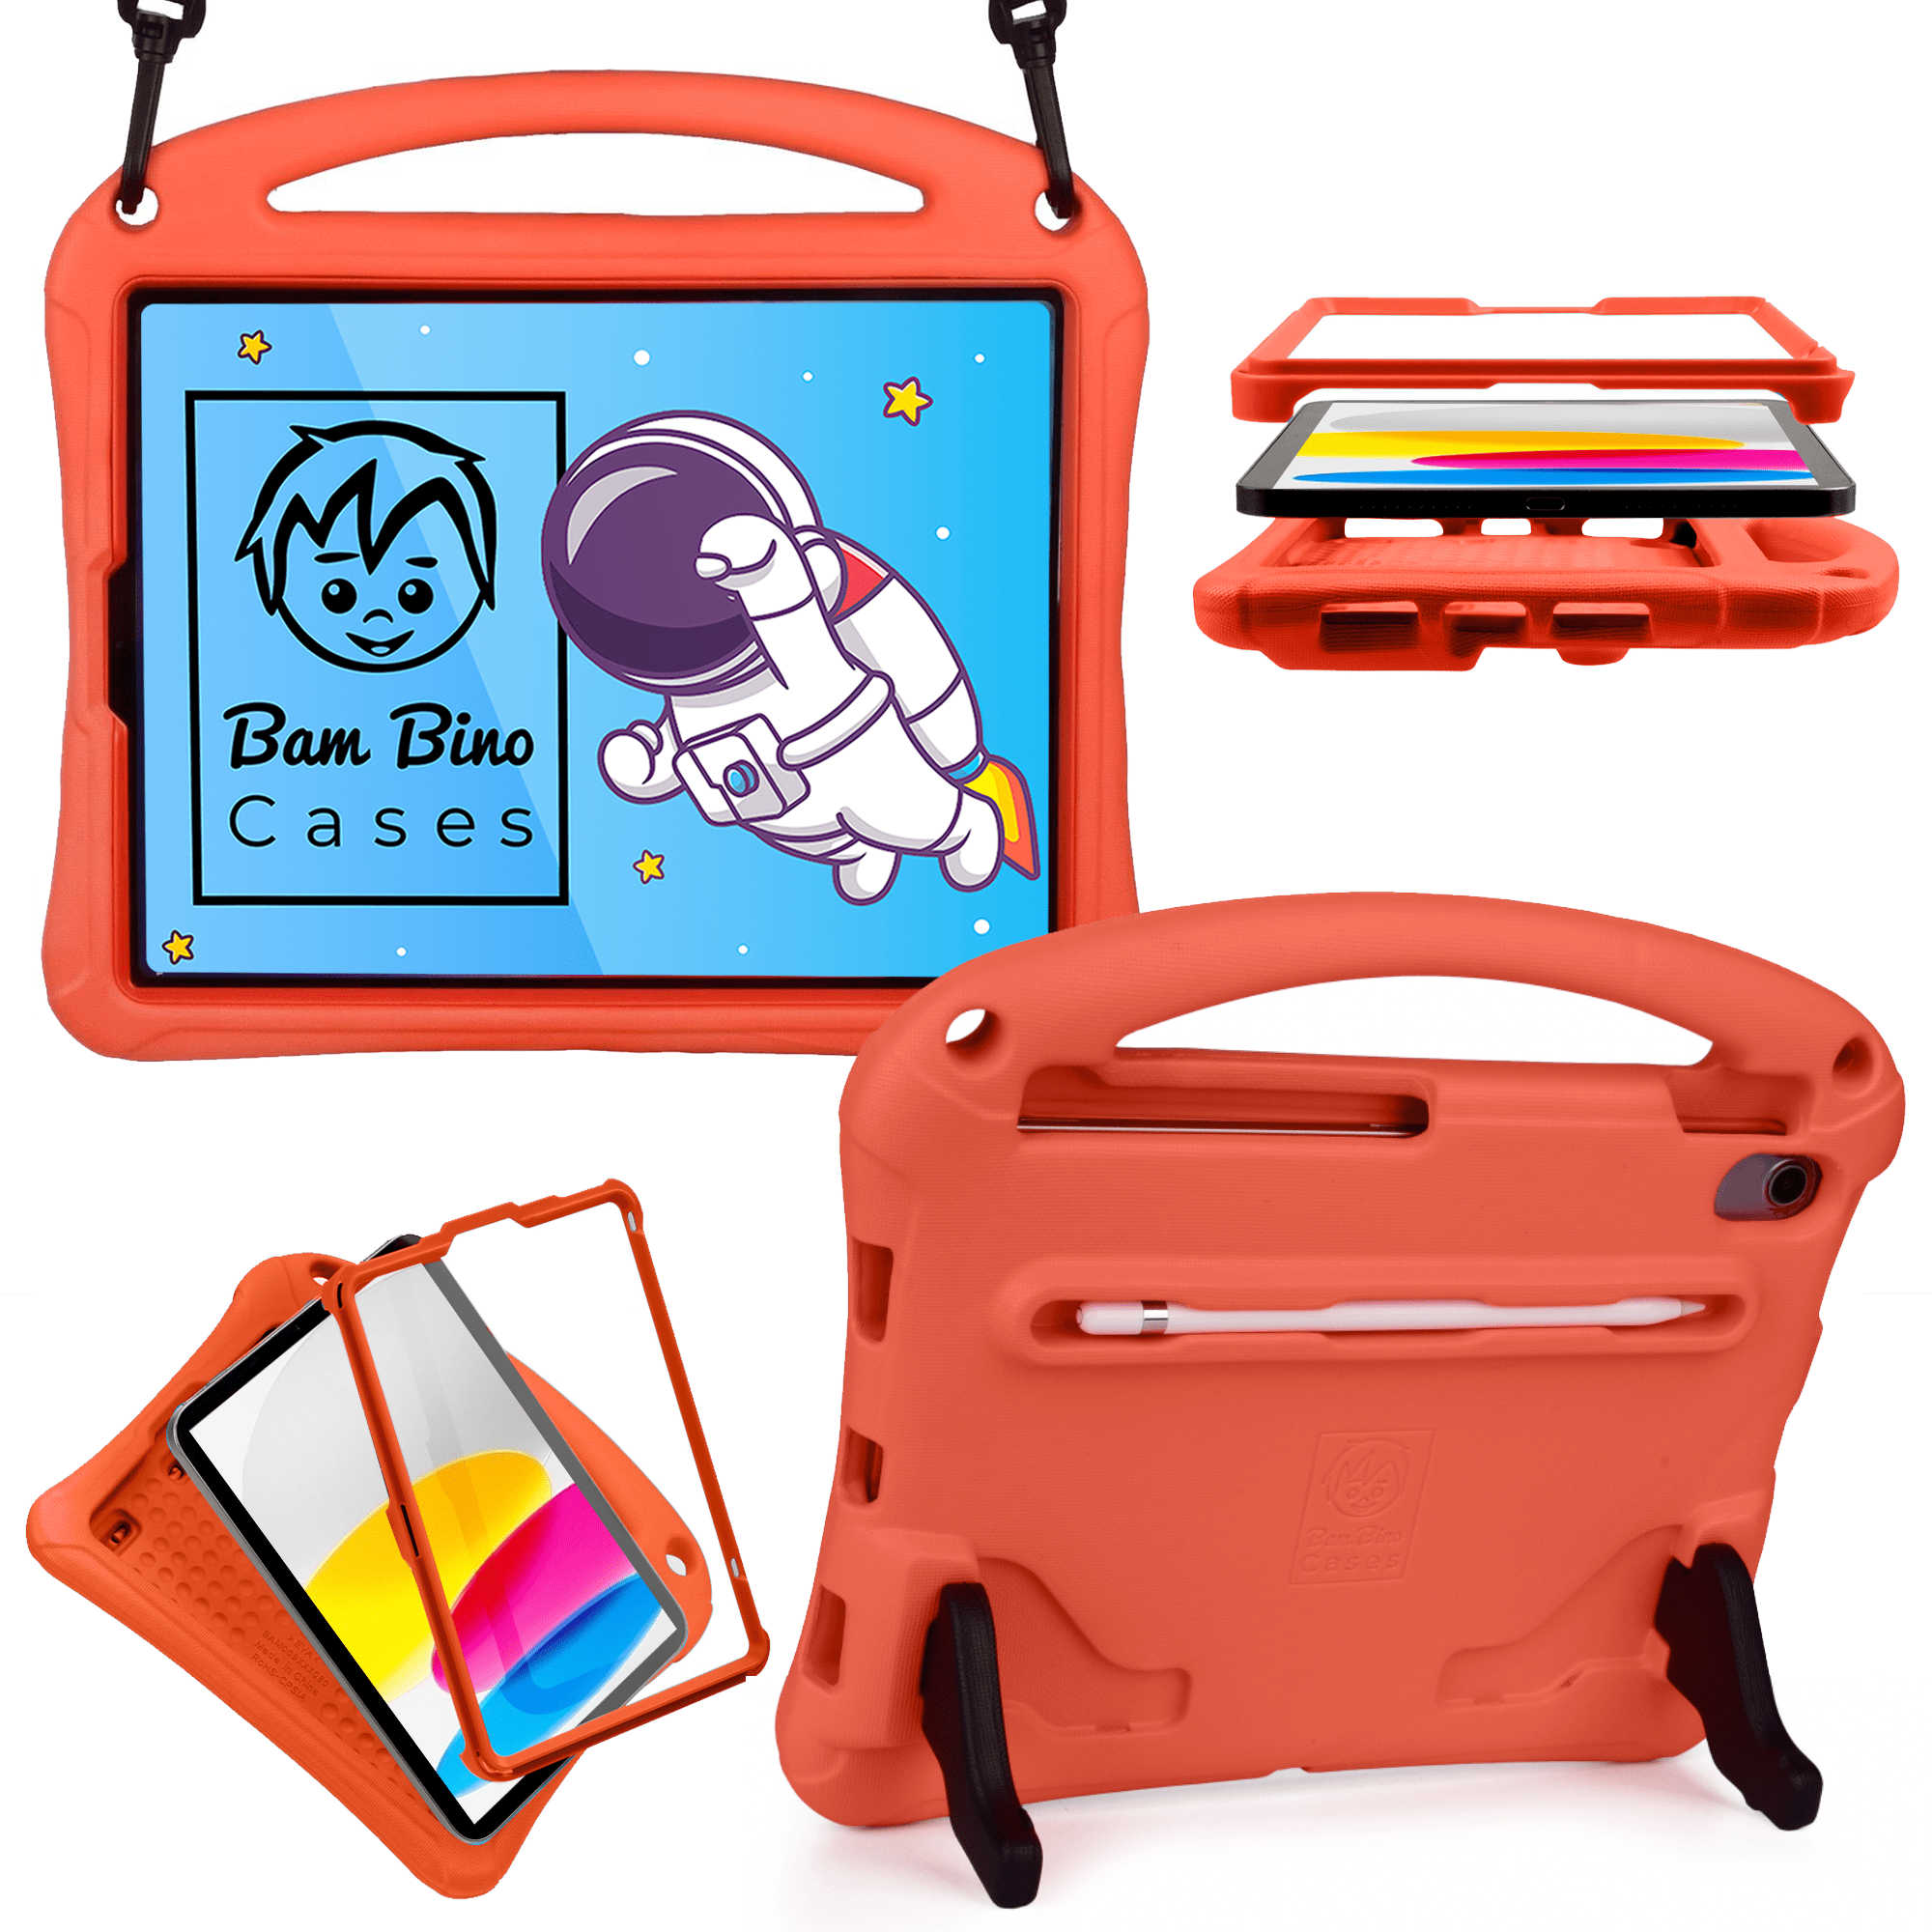 Bam Bino Space Suit Super Rugged Kids case with Screen Guard for iPad Air 3